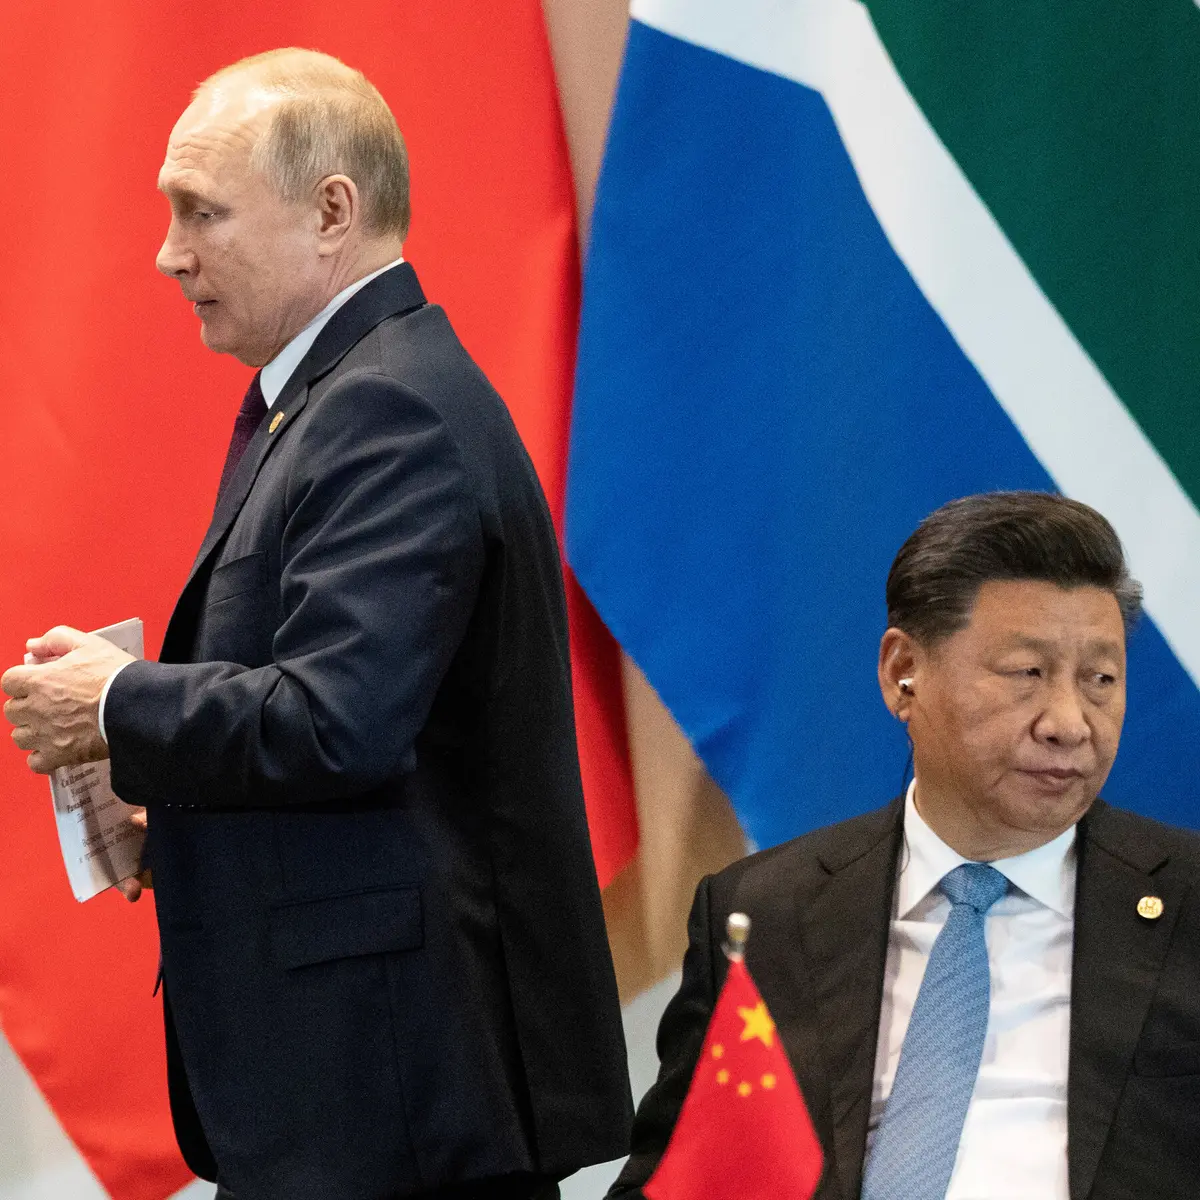 China Takes a Back Seat in International Diplomacy Over Ukraine